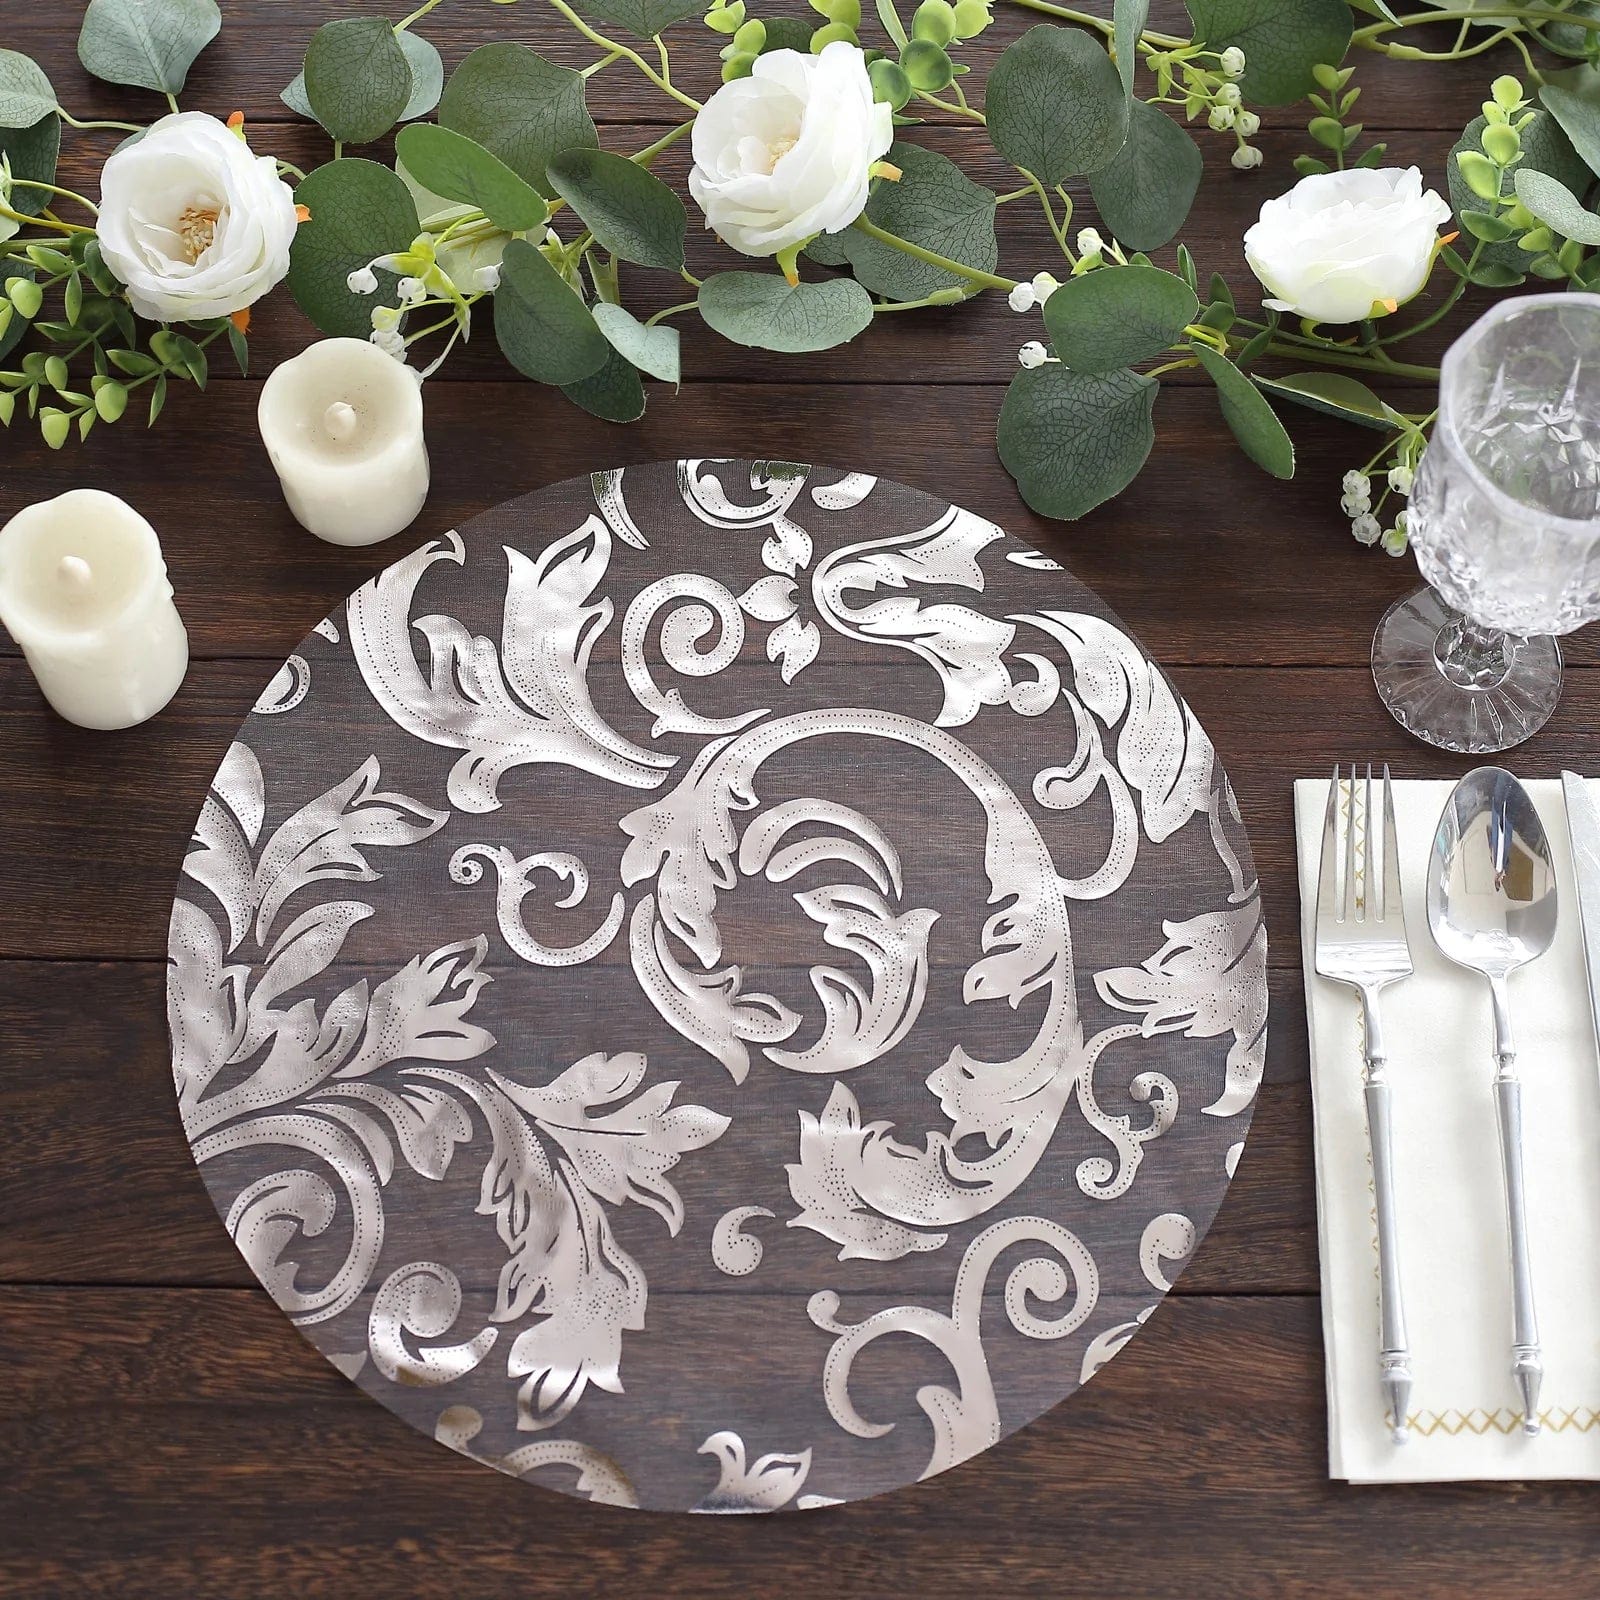 10 Round 13 in Sheer Organza Placemats with Metallic Swirl Foil Floral Design